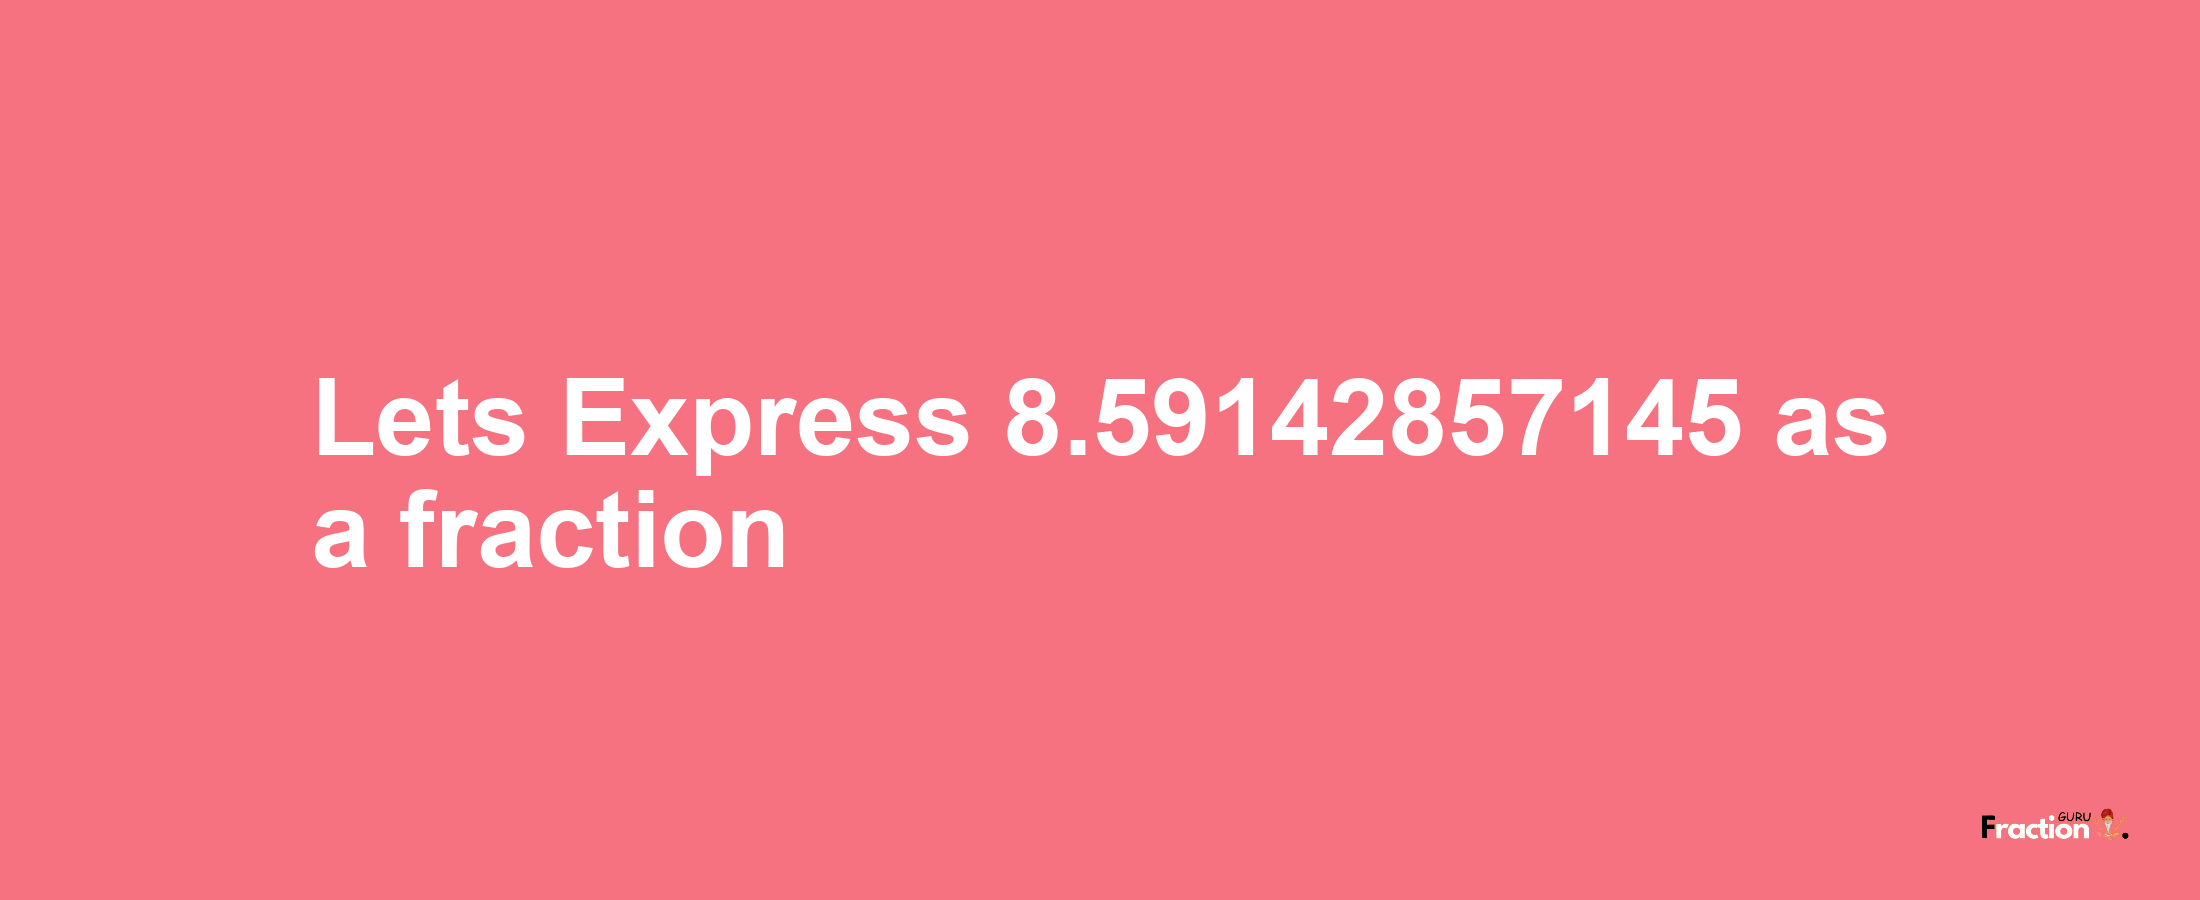 Lets Express 8.59142857145 as afraction